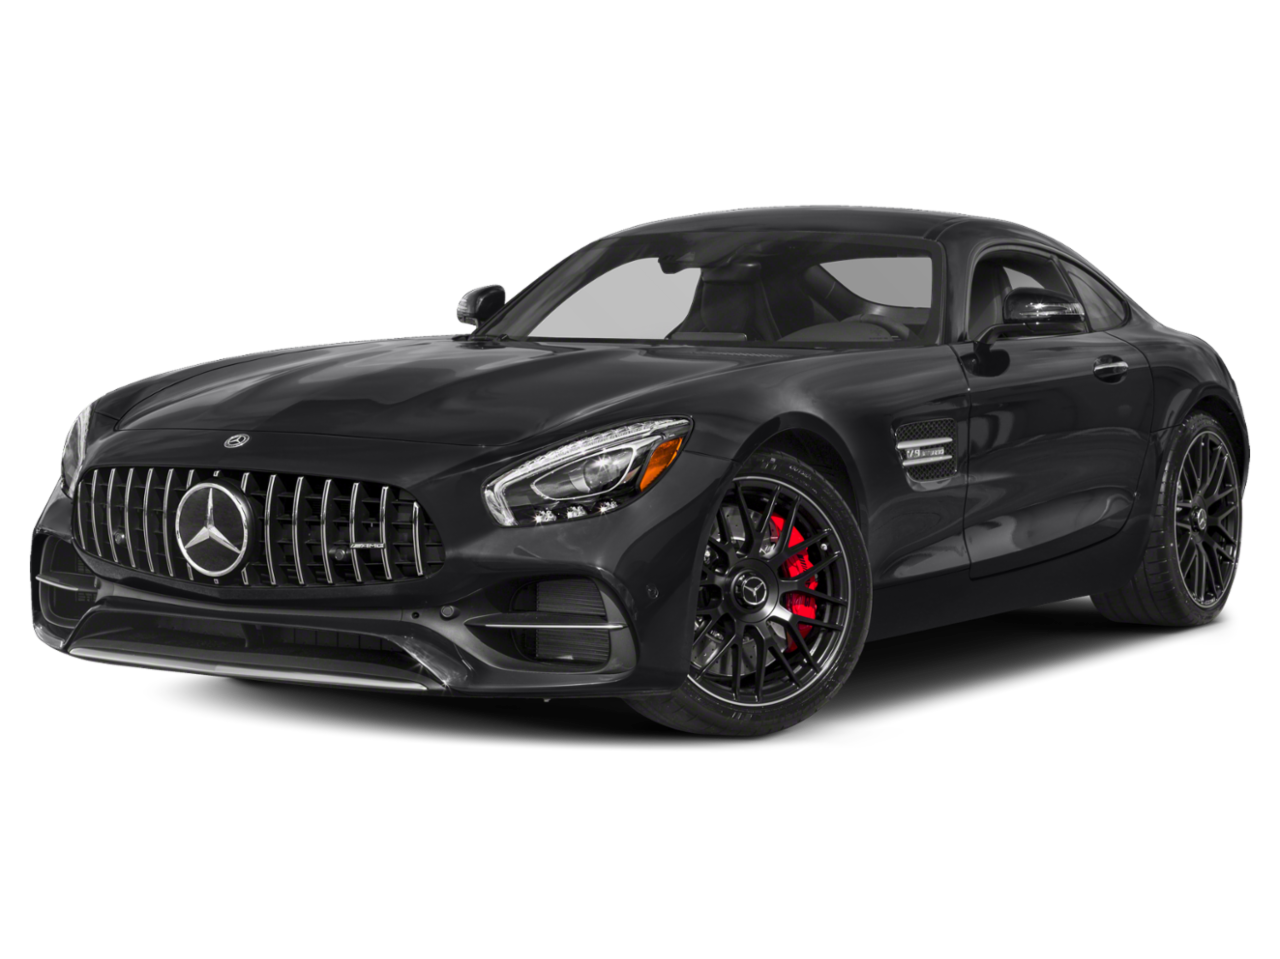 Mercedes Benz AMG GT 2021 Specs, Prices, Photo & More